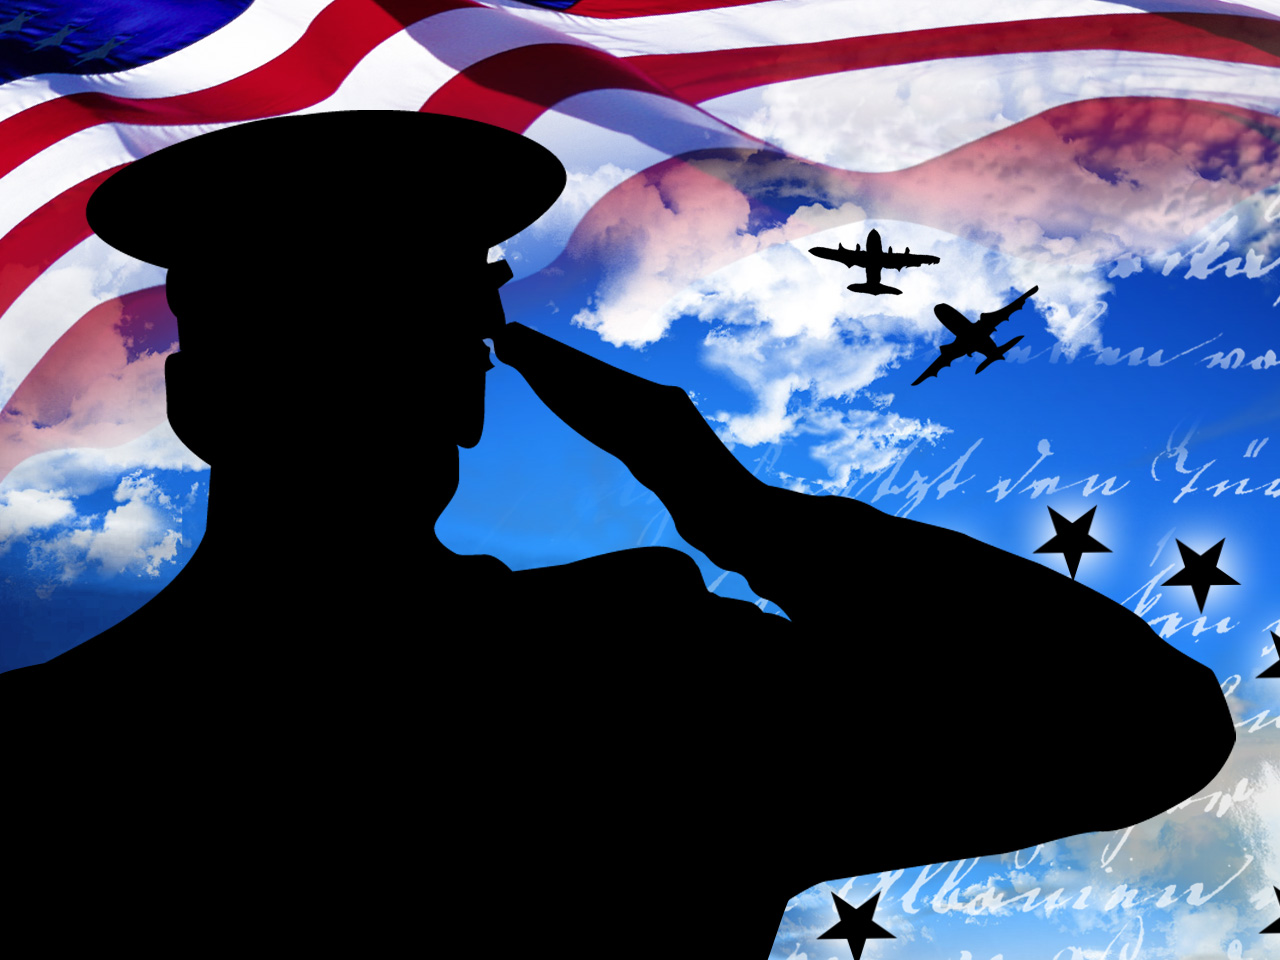 Us Armed Forces Officer Salutes Flag Silhouette 1 1280x960 Jpg